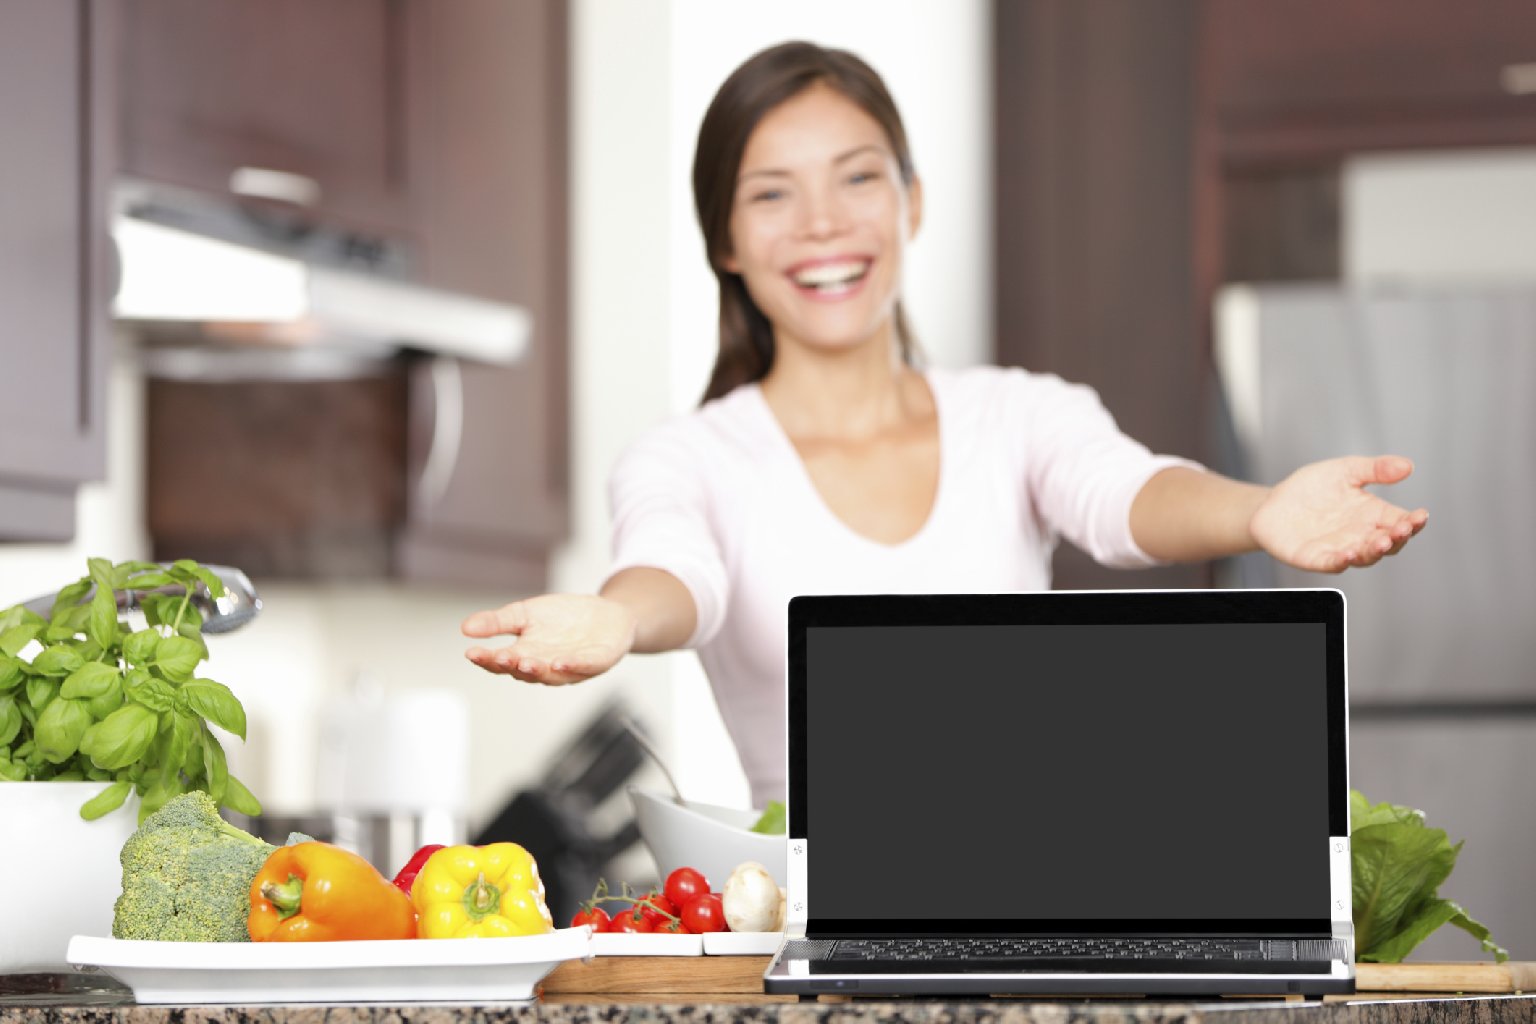 These websites can provide some places to purchase handy items for your kitchen. Photo: Thinkstock